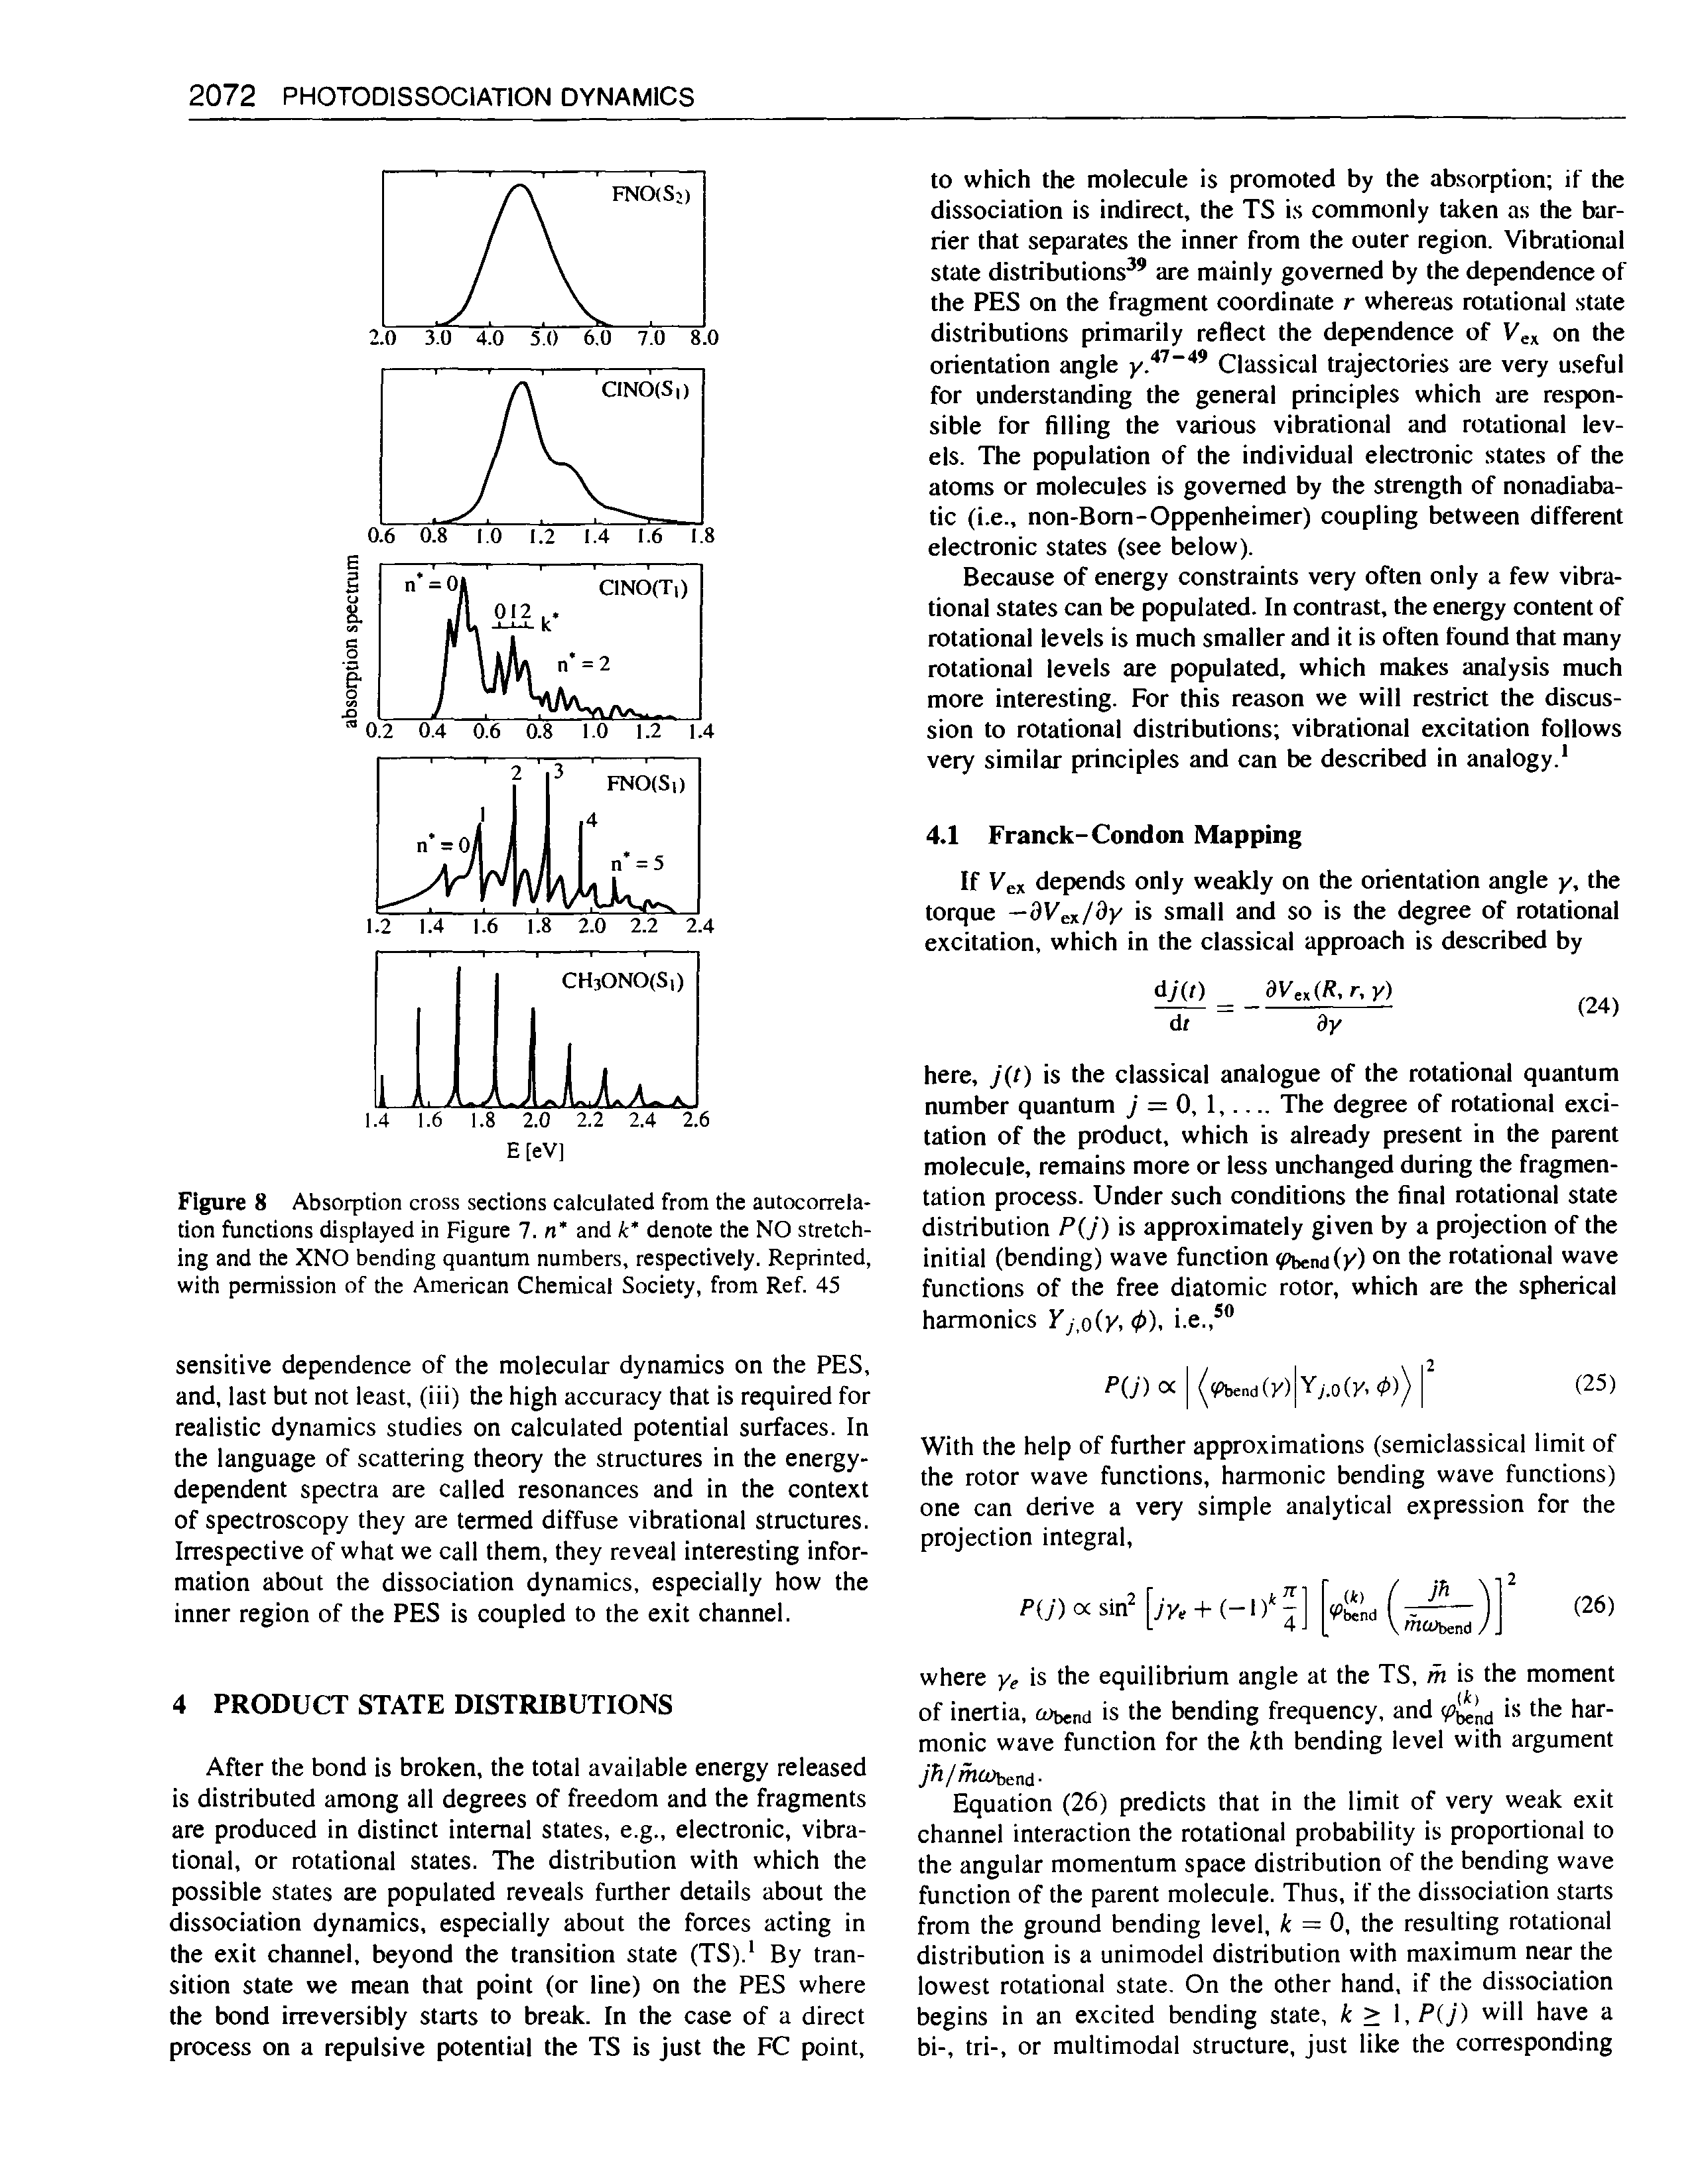 Figure 8 Absorption cross sections calculated from the autocorrelation functions displayed in Figure 7. n and k denote the NO stretching and the XNO bending quantum numbers, respectively. Reprinted, with permission of the American Chemical Society, from Ref. 45...